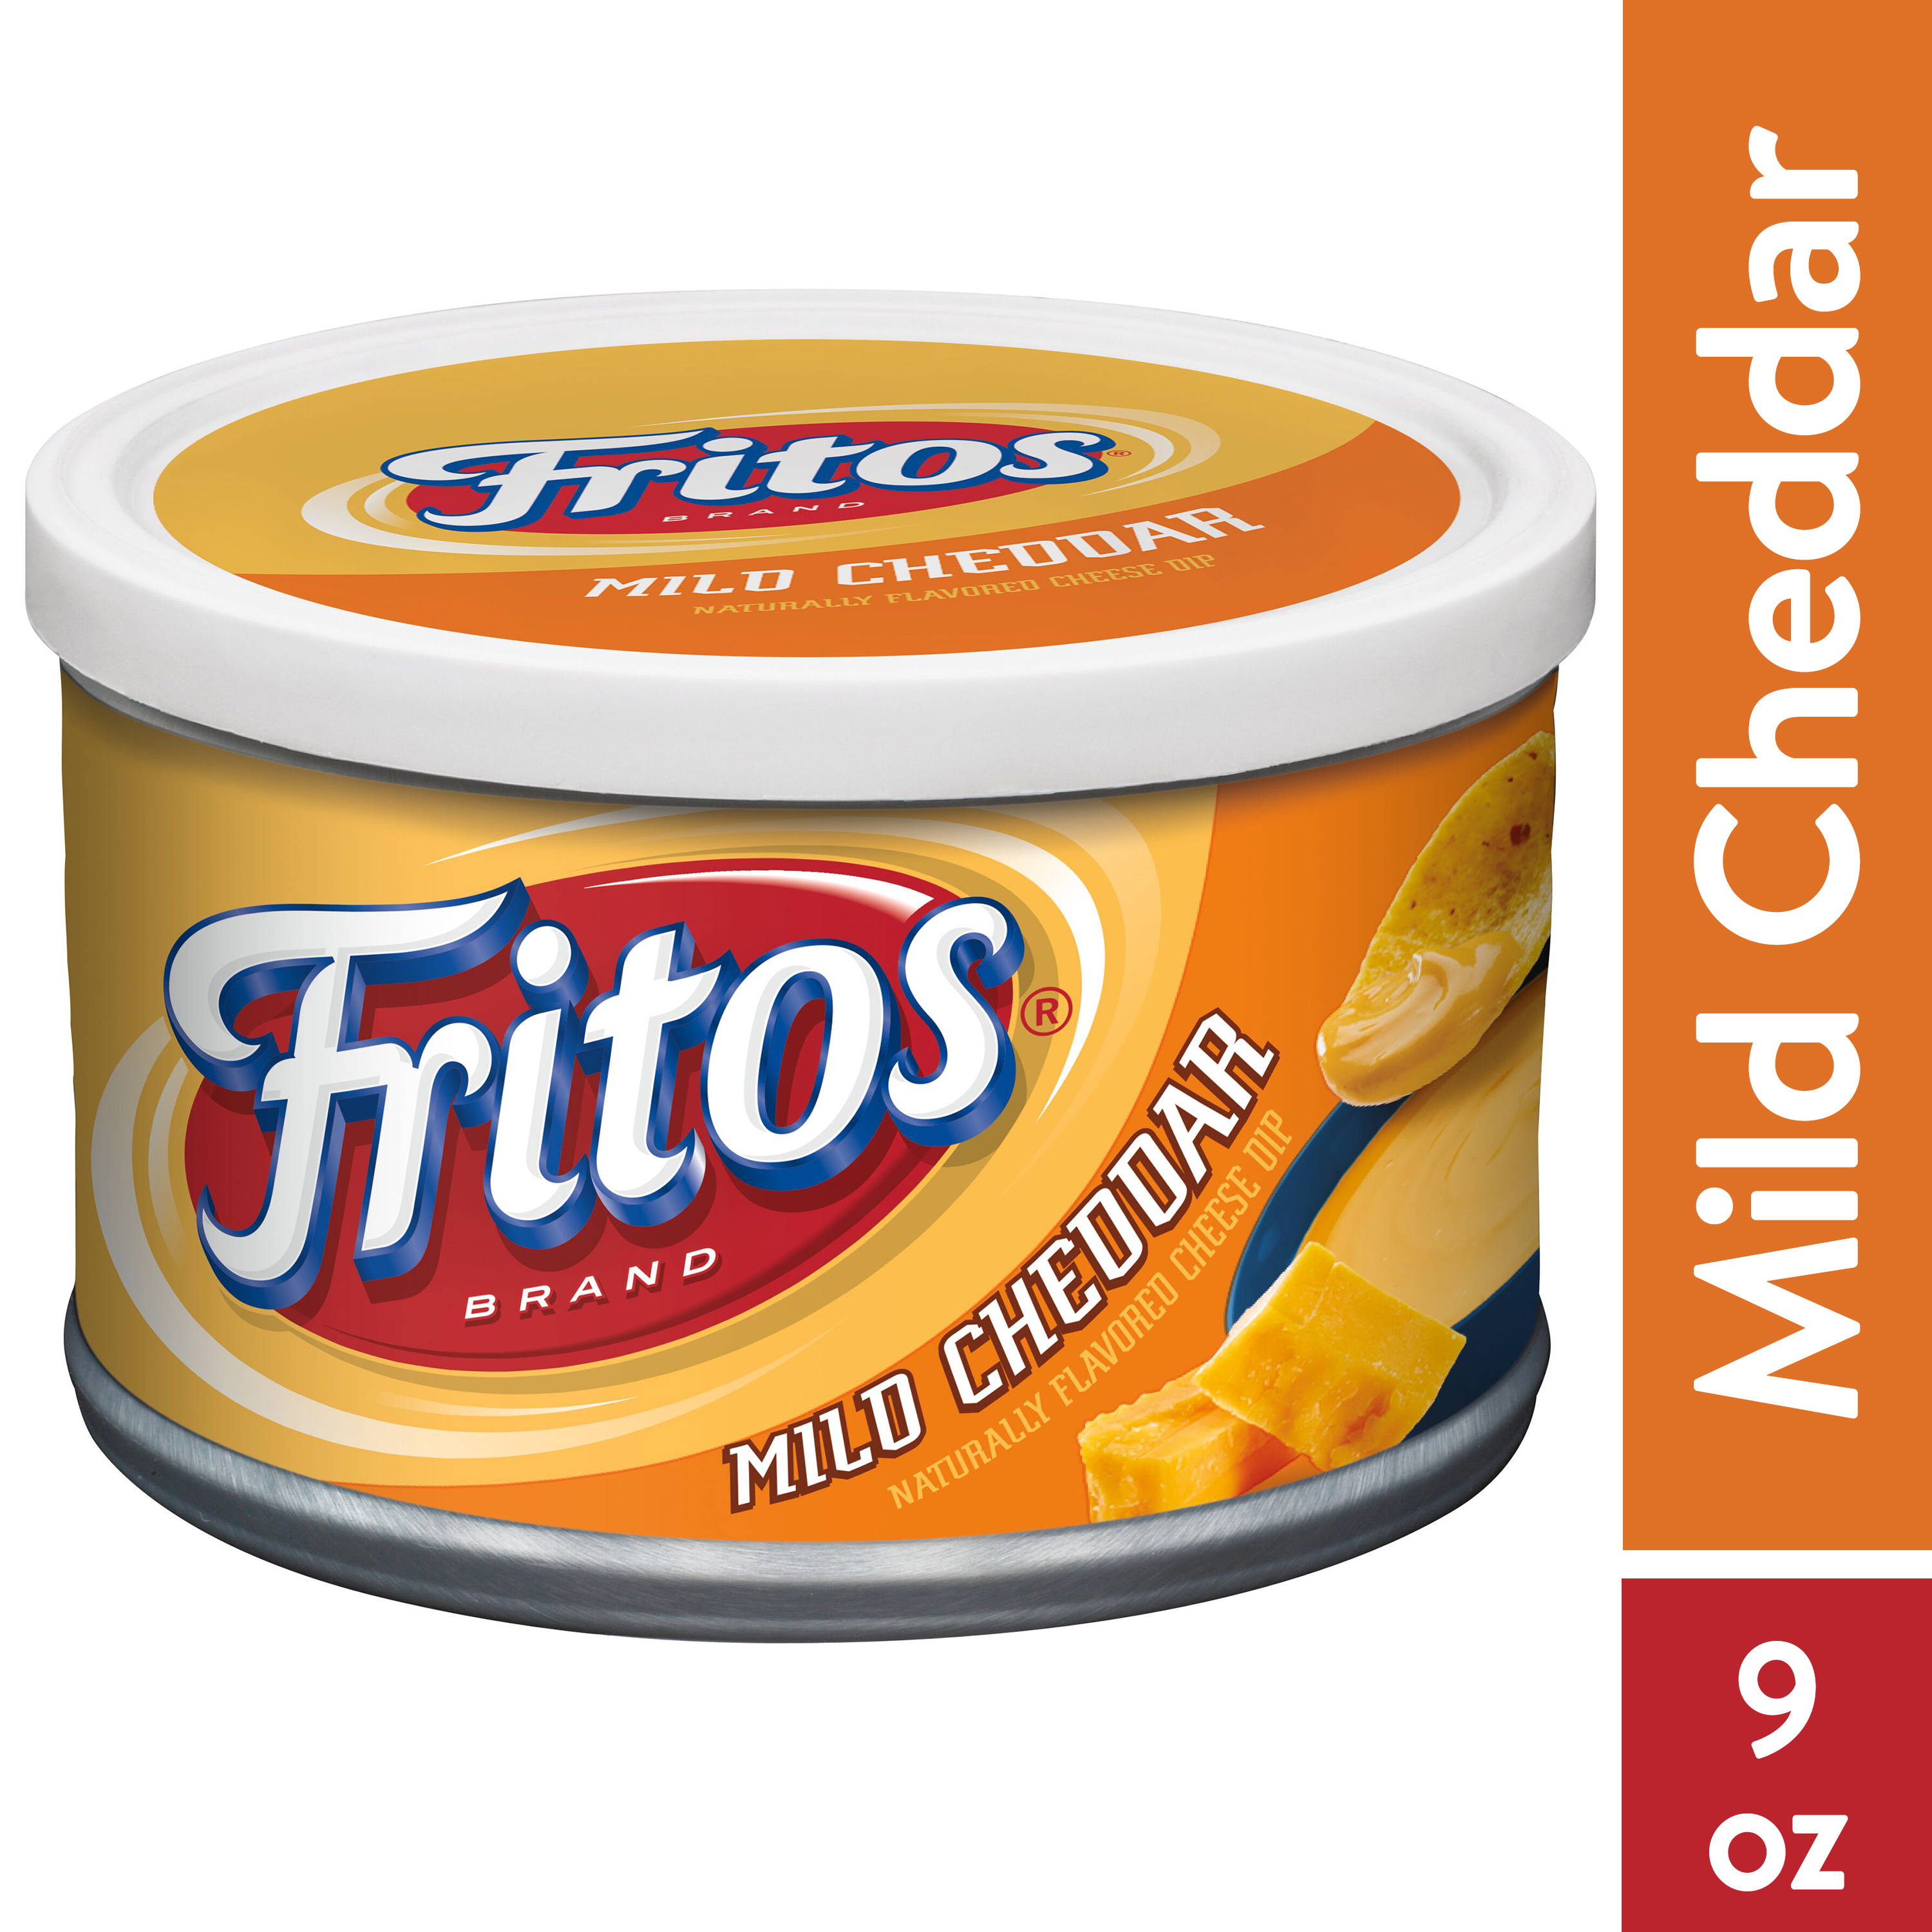 Fritos Mild Cheddar Flavored Cheese Dip, 9 oz Shelf-stable Can - image 1 of 9